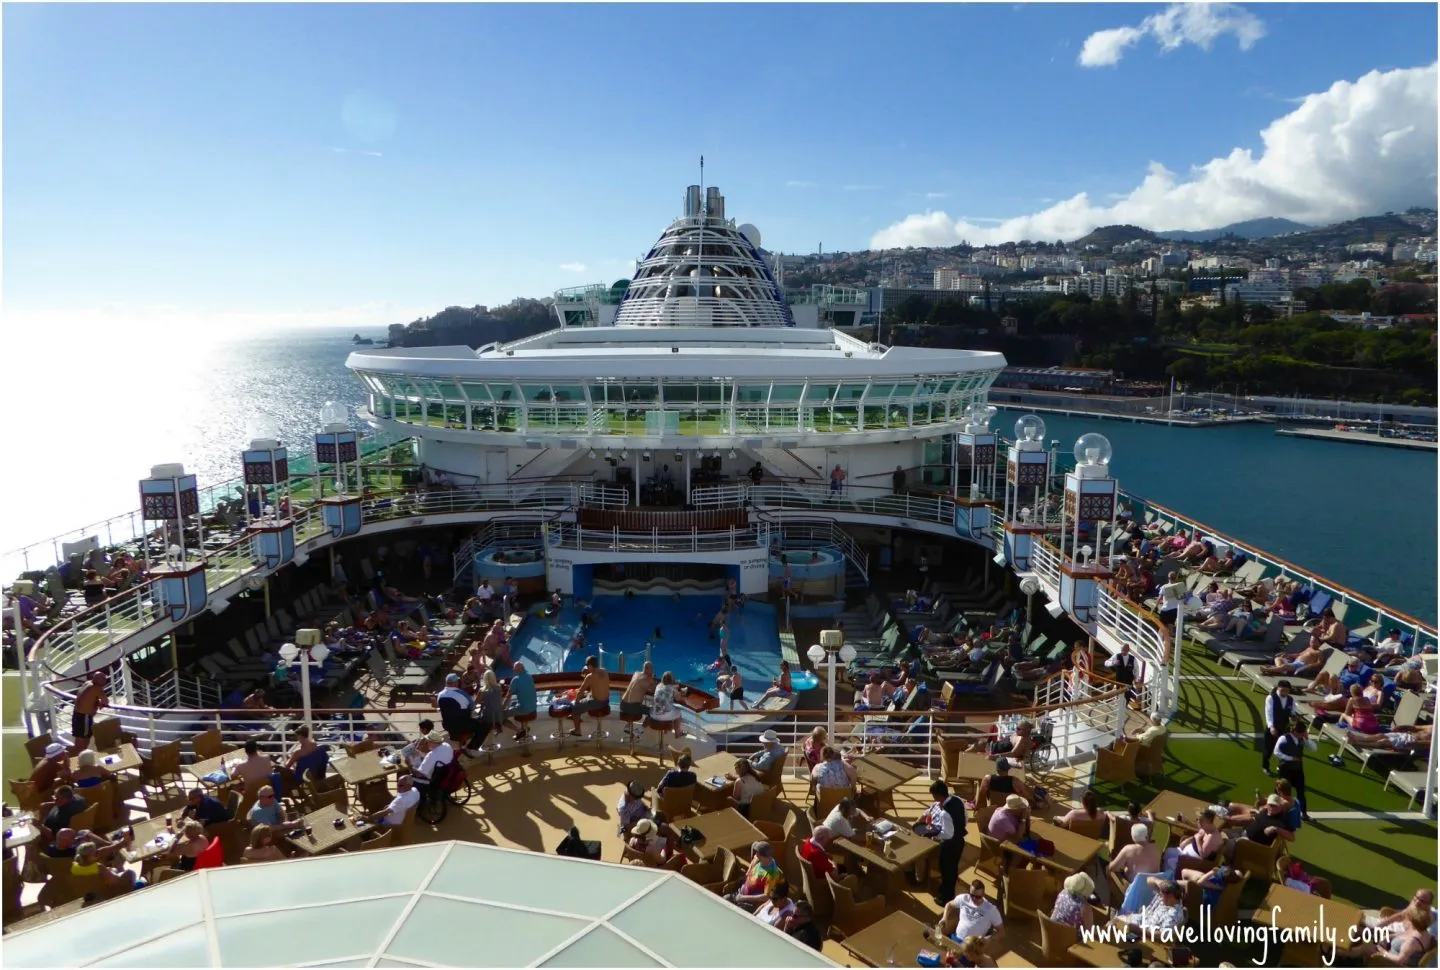 Madeira Welcomes Most Cruisers From All Over The World With Its Cultural Heritage